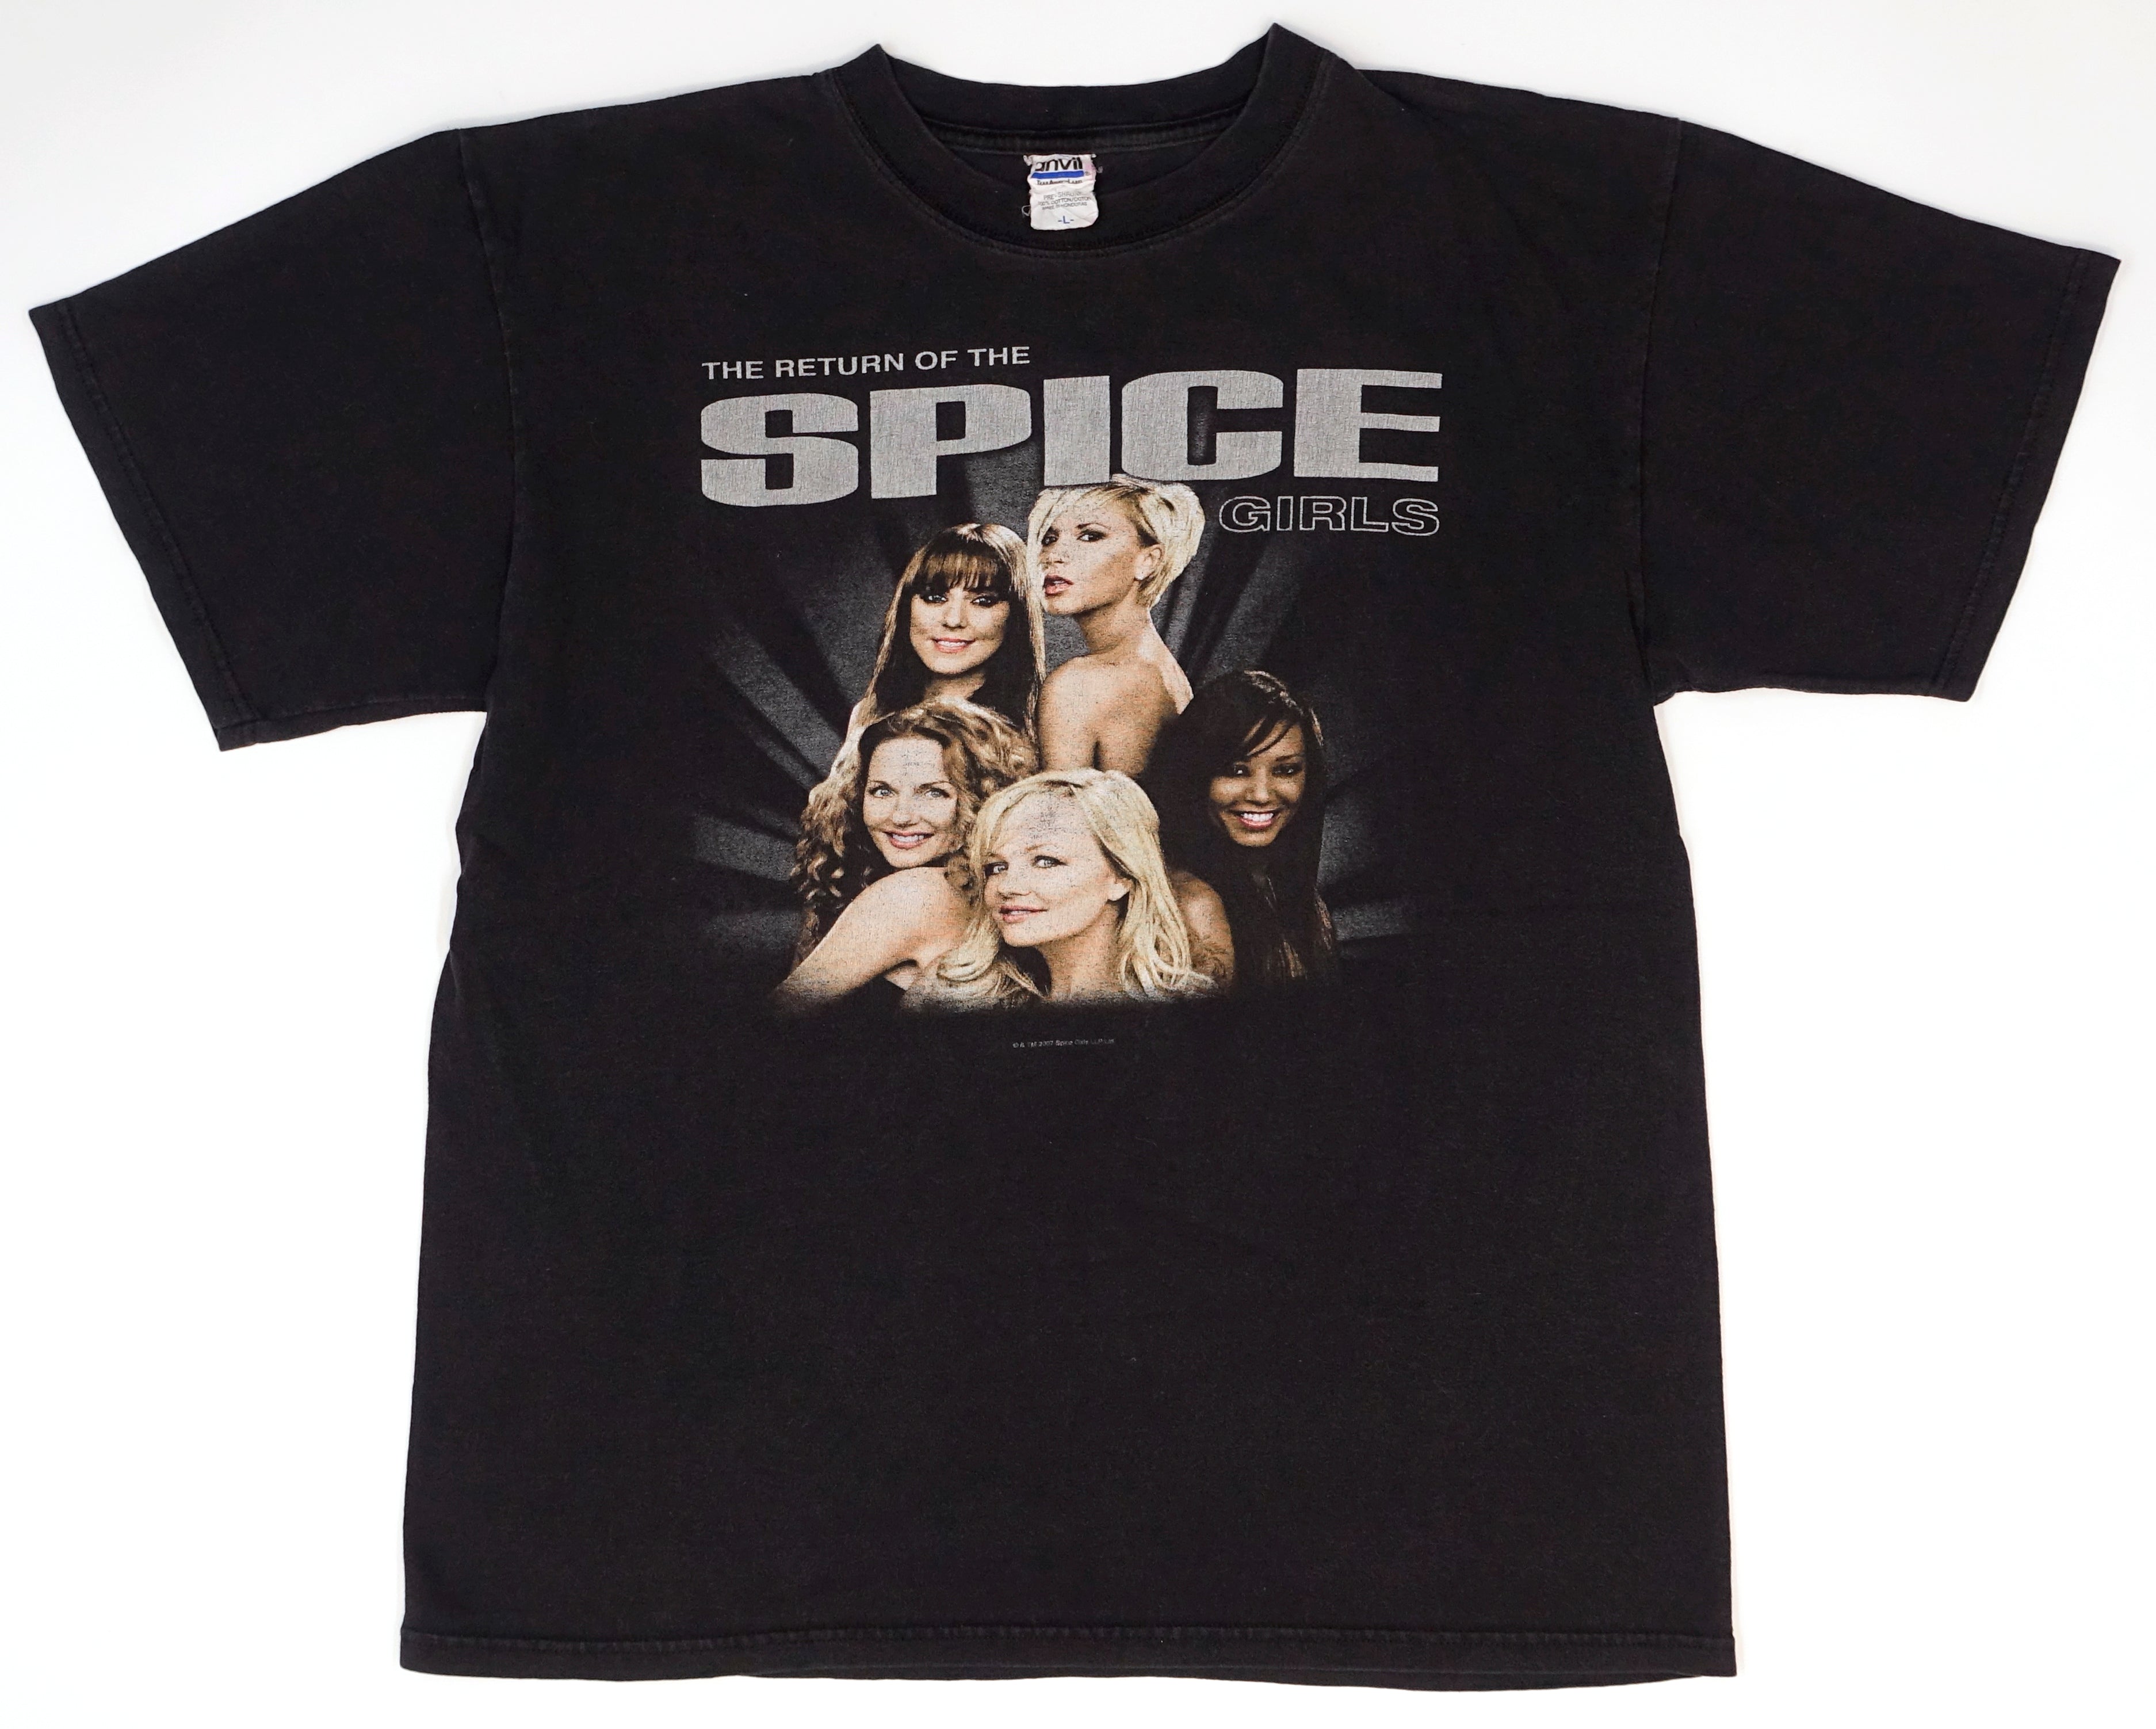 Spice Girls - the Return Of The Spice Girls 2007 Tour Shirt Size Large